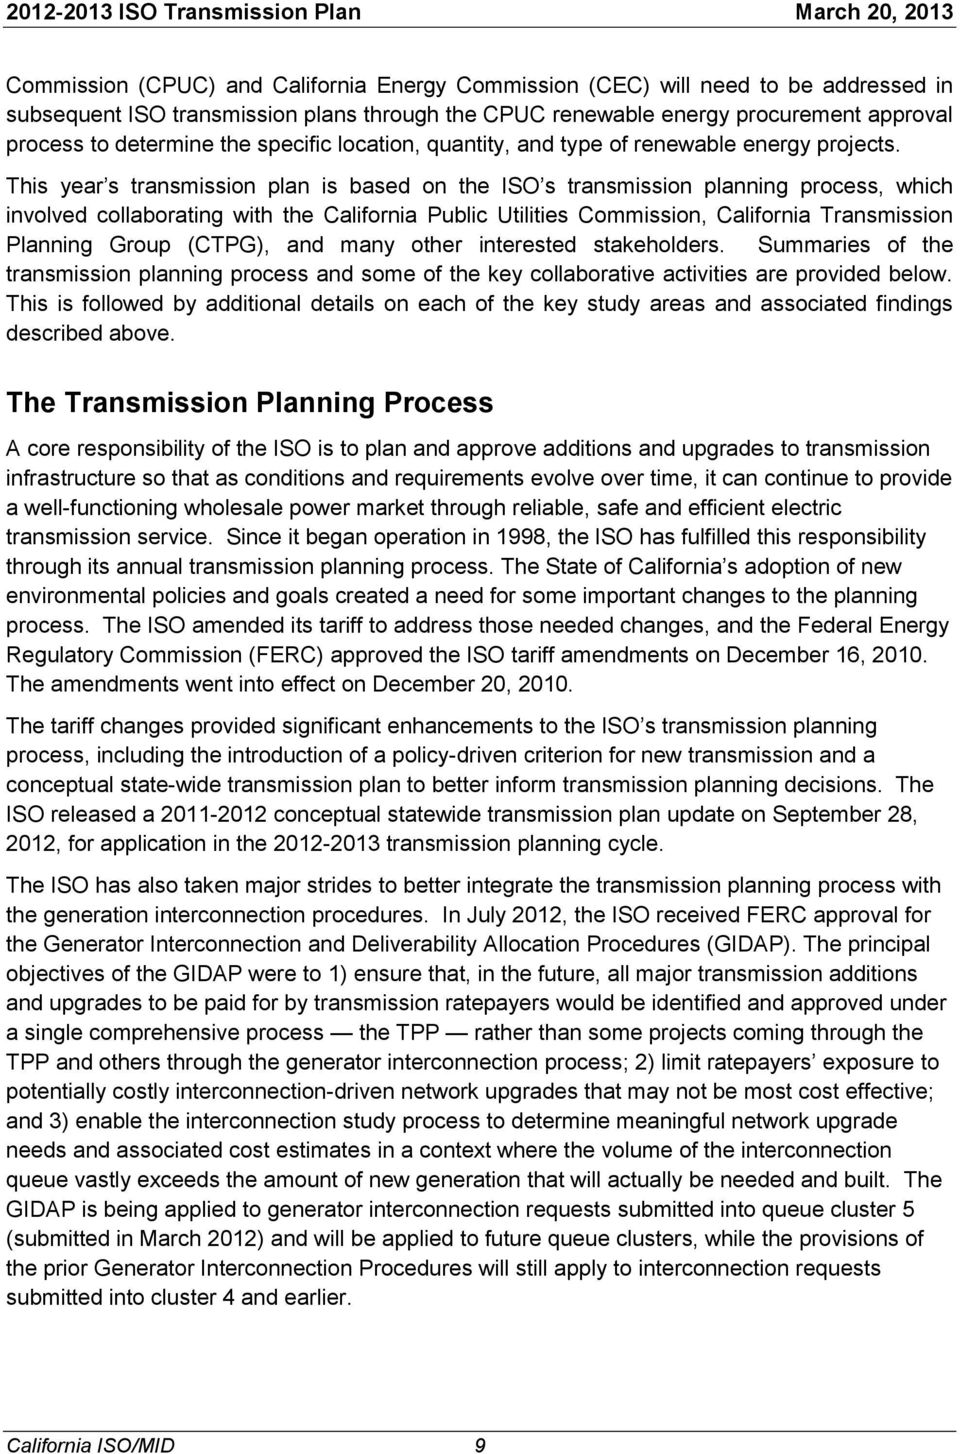 This year s transmission plan is based on the ISO s transmission planning process, which involved collaborating with the California Public Utilities Commission, California Transmission Planning Group